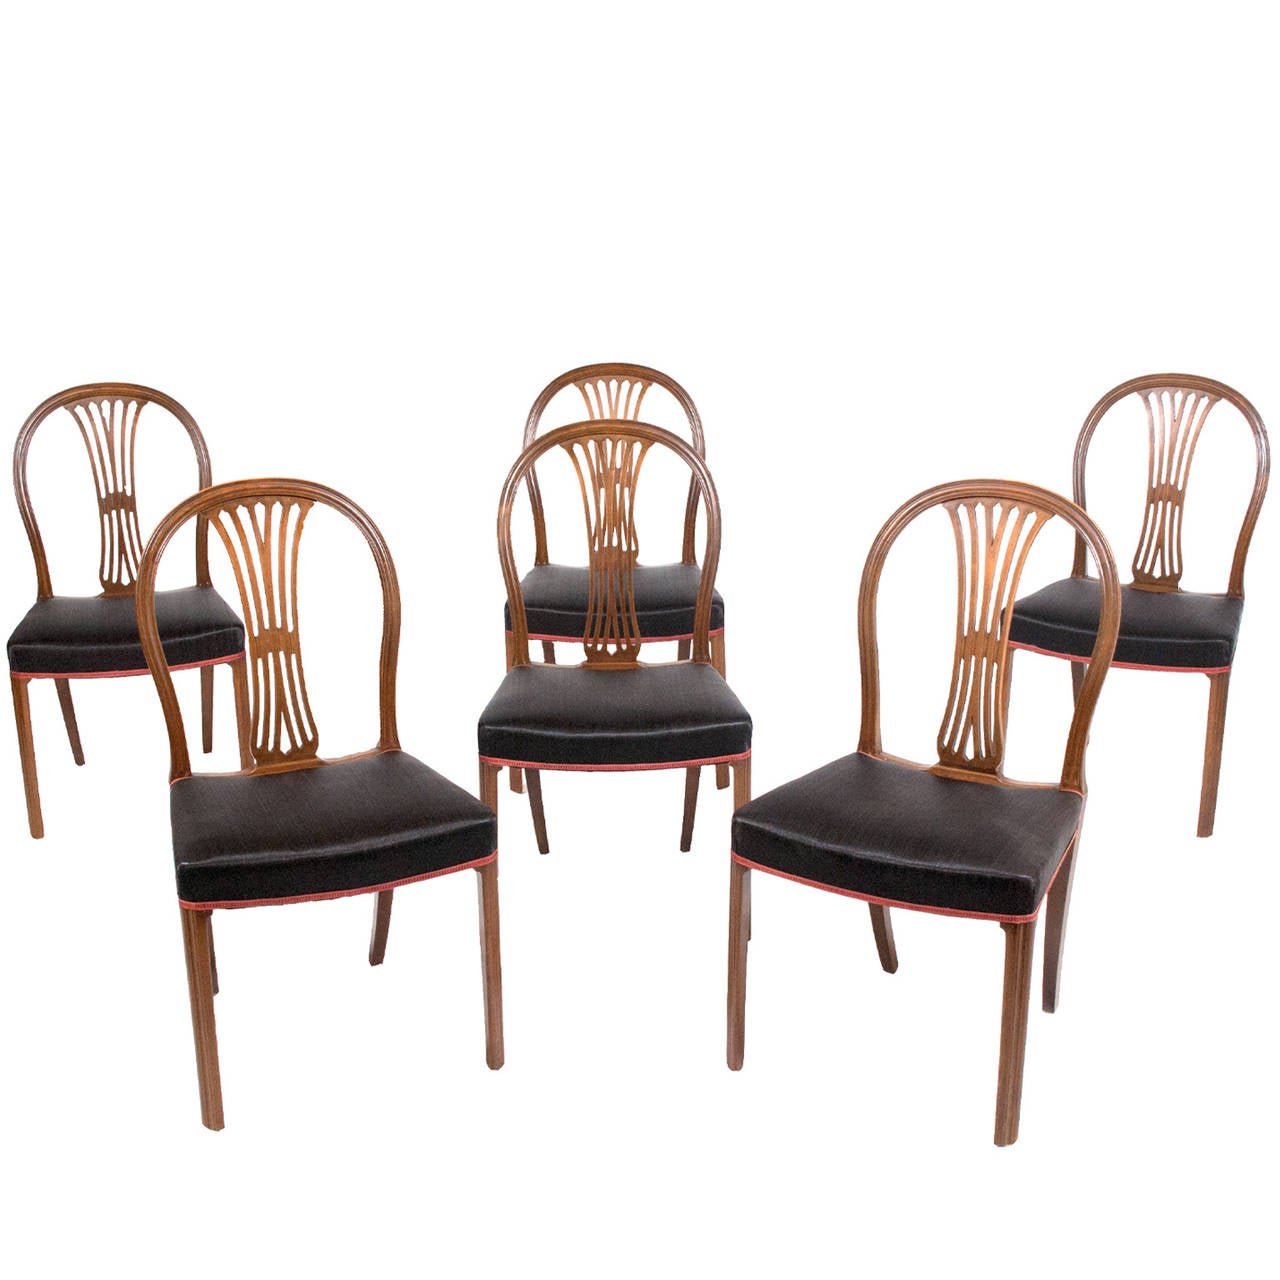 Set of six walnut stained beechwood dining chairs by Frits Henningsen from the 1930s, original horsehair seat upholstery.